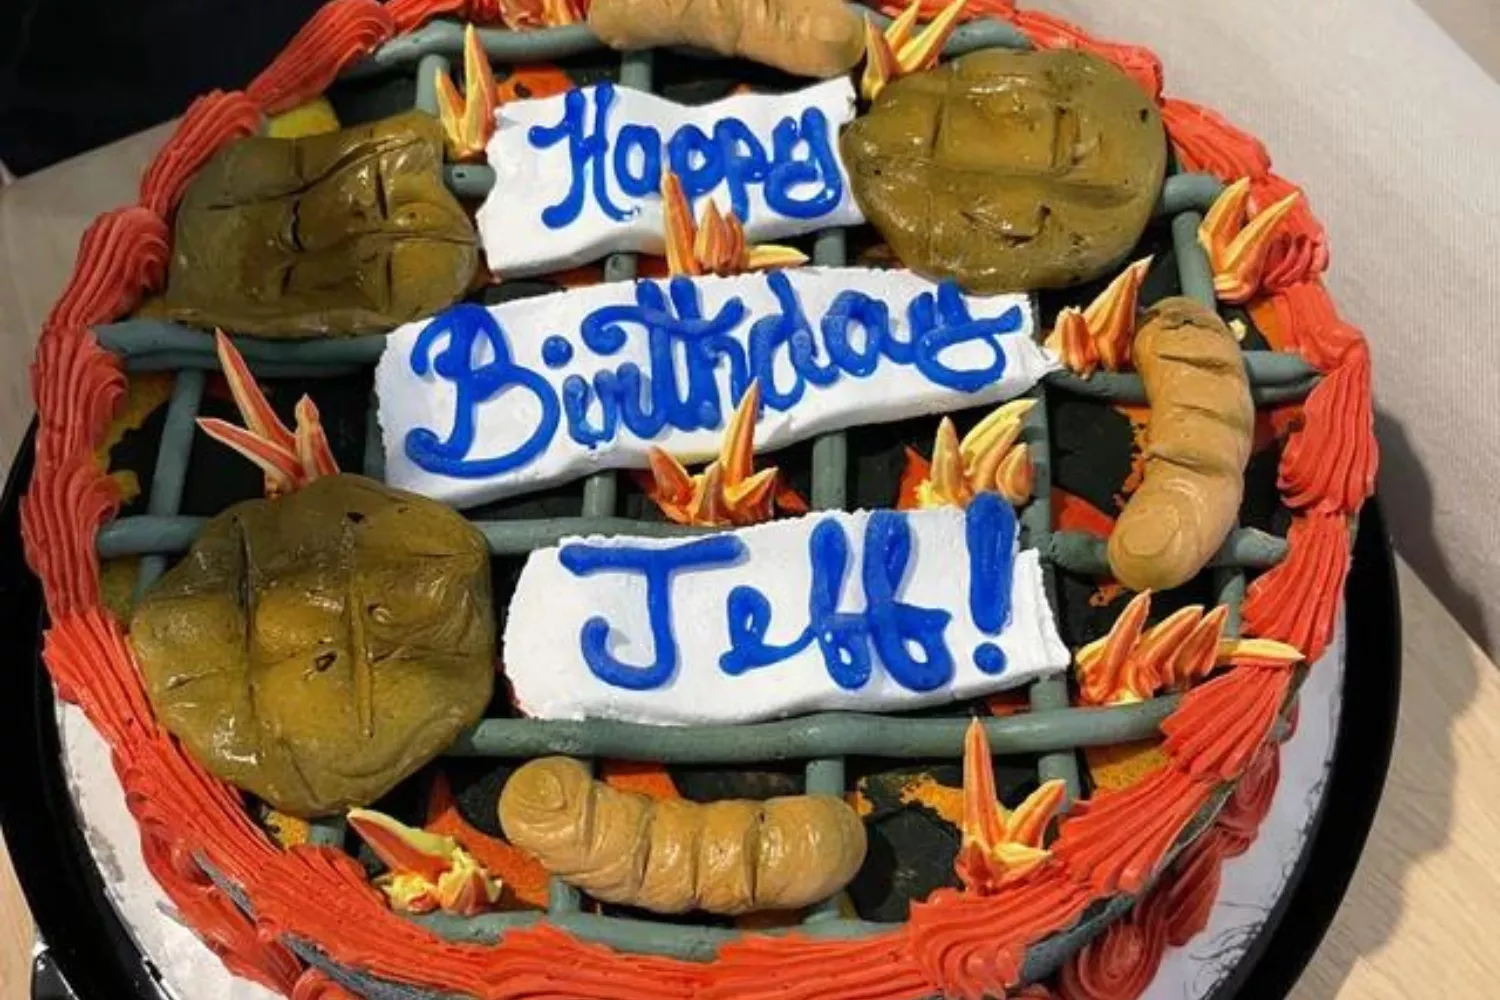 Get Caked Bakery - This fishing themed first birthday cake is adorable!!  #getcakedbakery #getcakedroc #roc #bakery #birthdaycake #firstbirthdaycake  #firstbirthday #fishing | Facebook